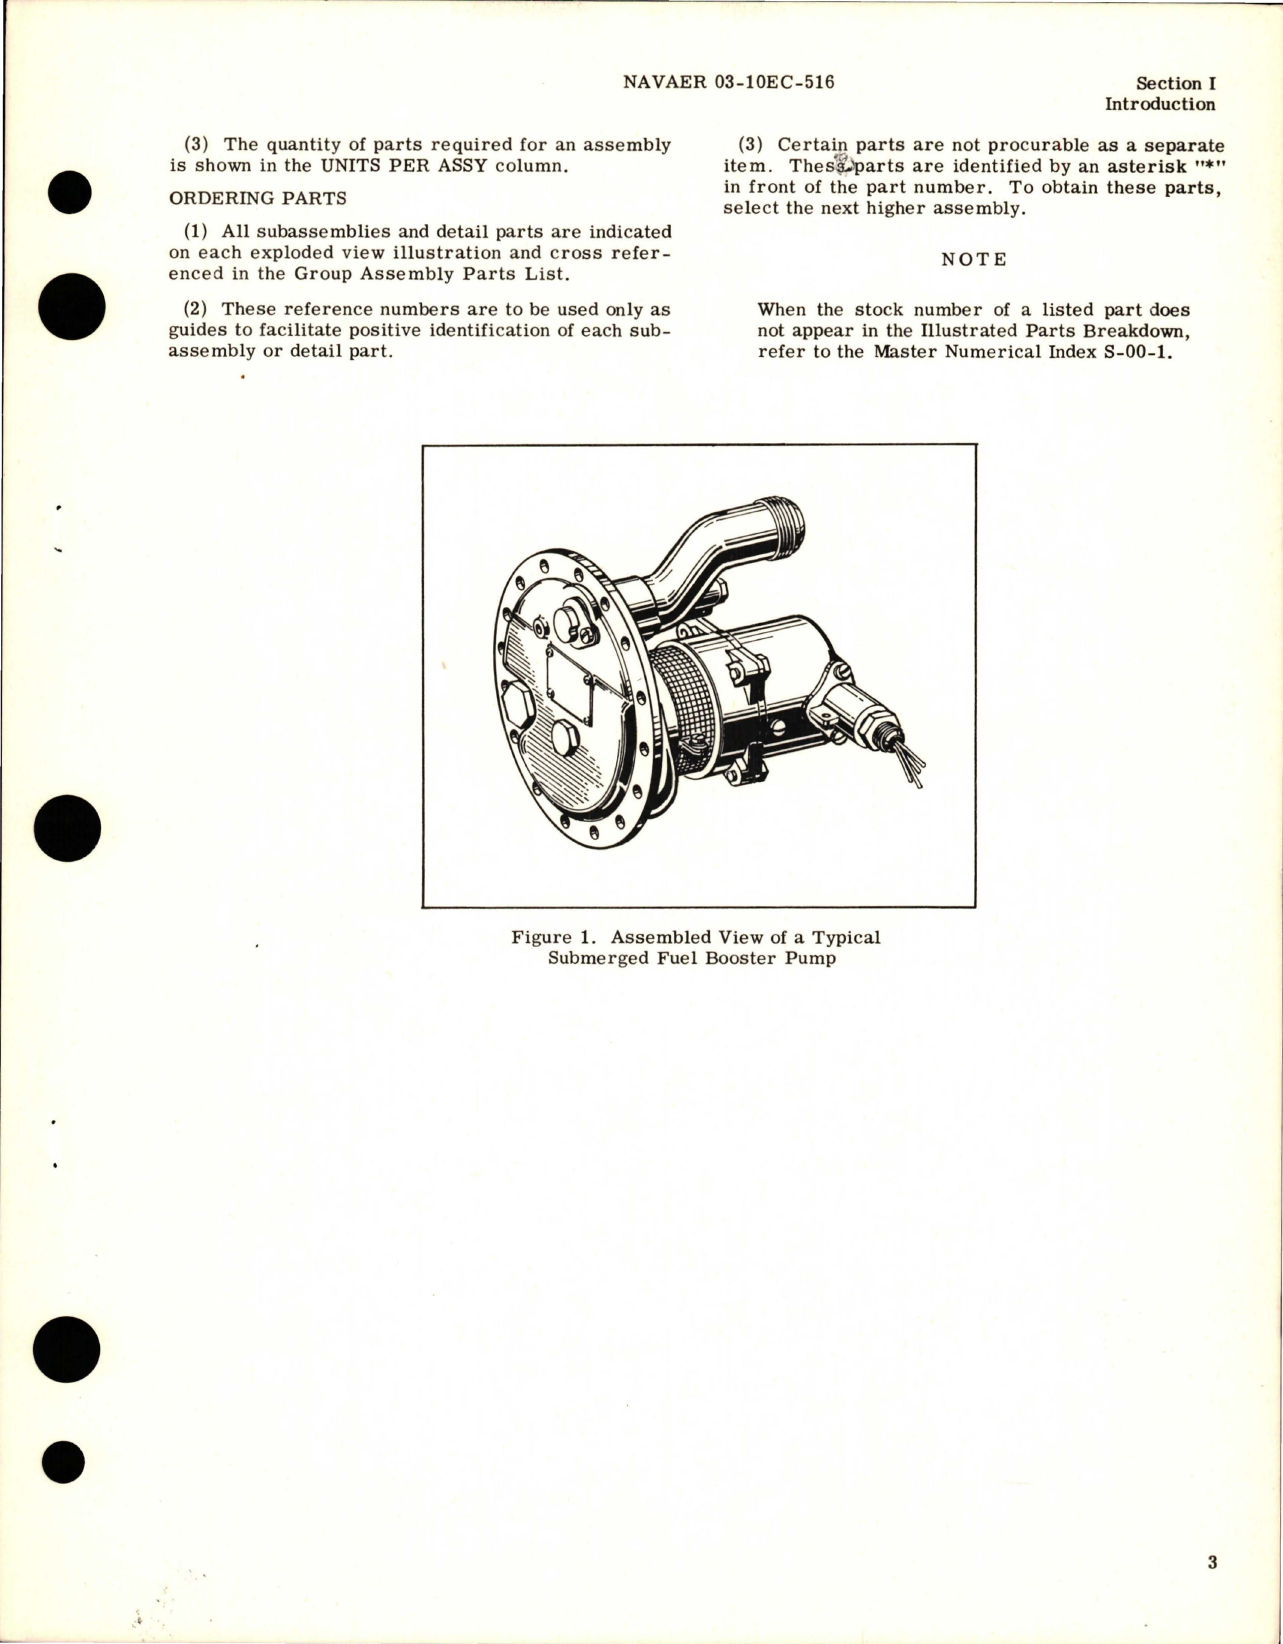 Sample page 5 from AirCorps Library document: Illustrated Parts Breakdown for Submerged Fuel Booster Pump